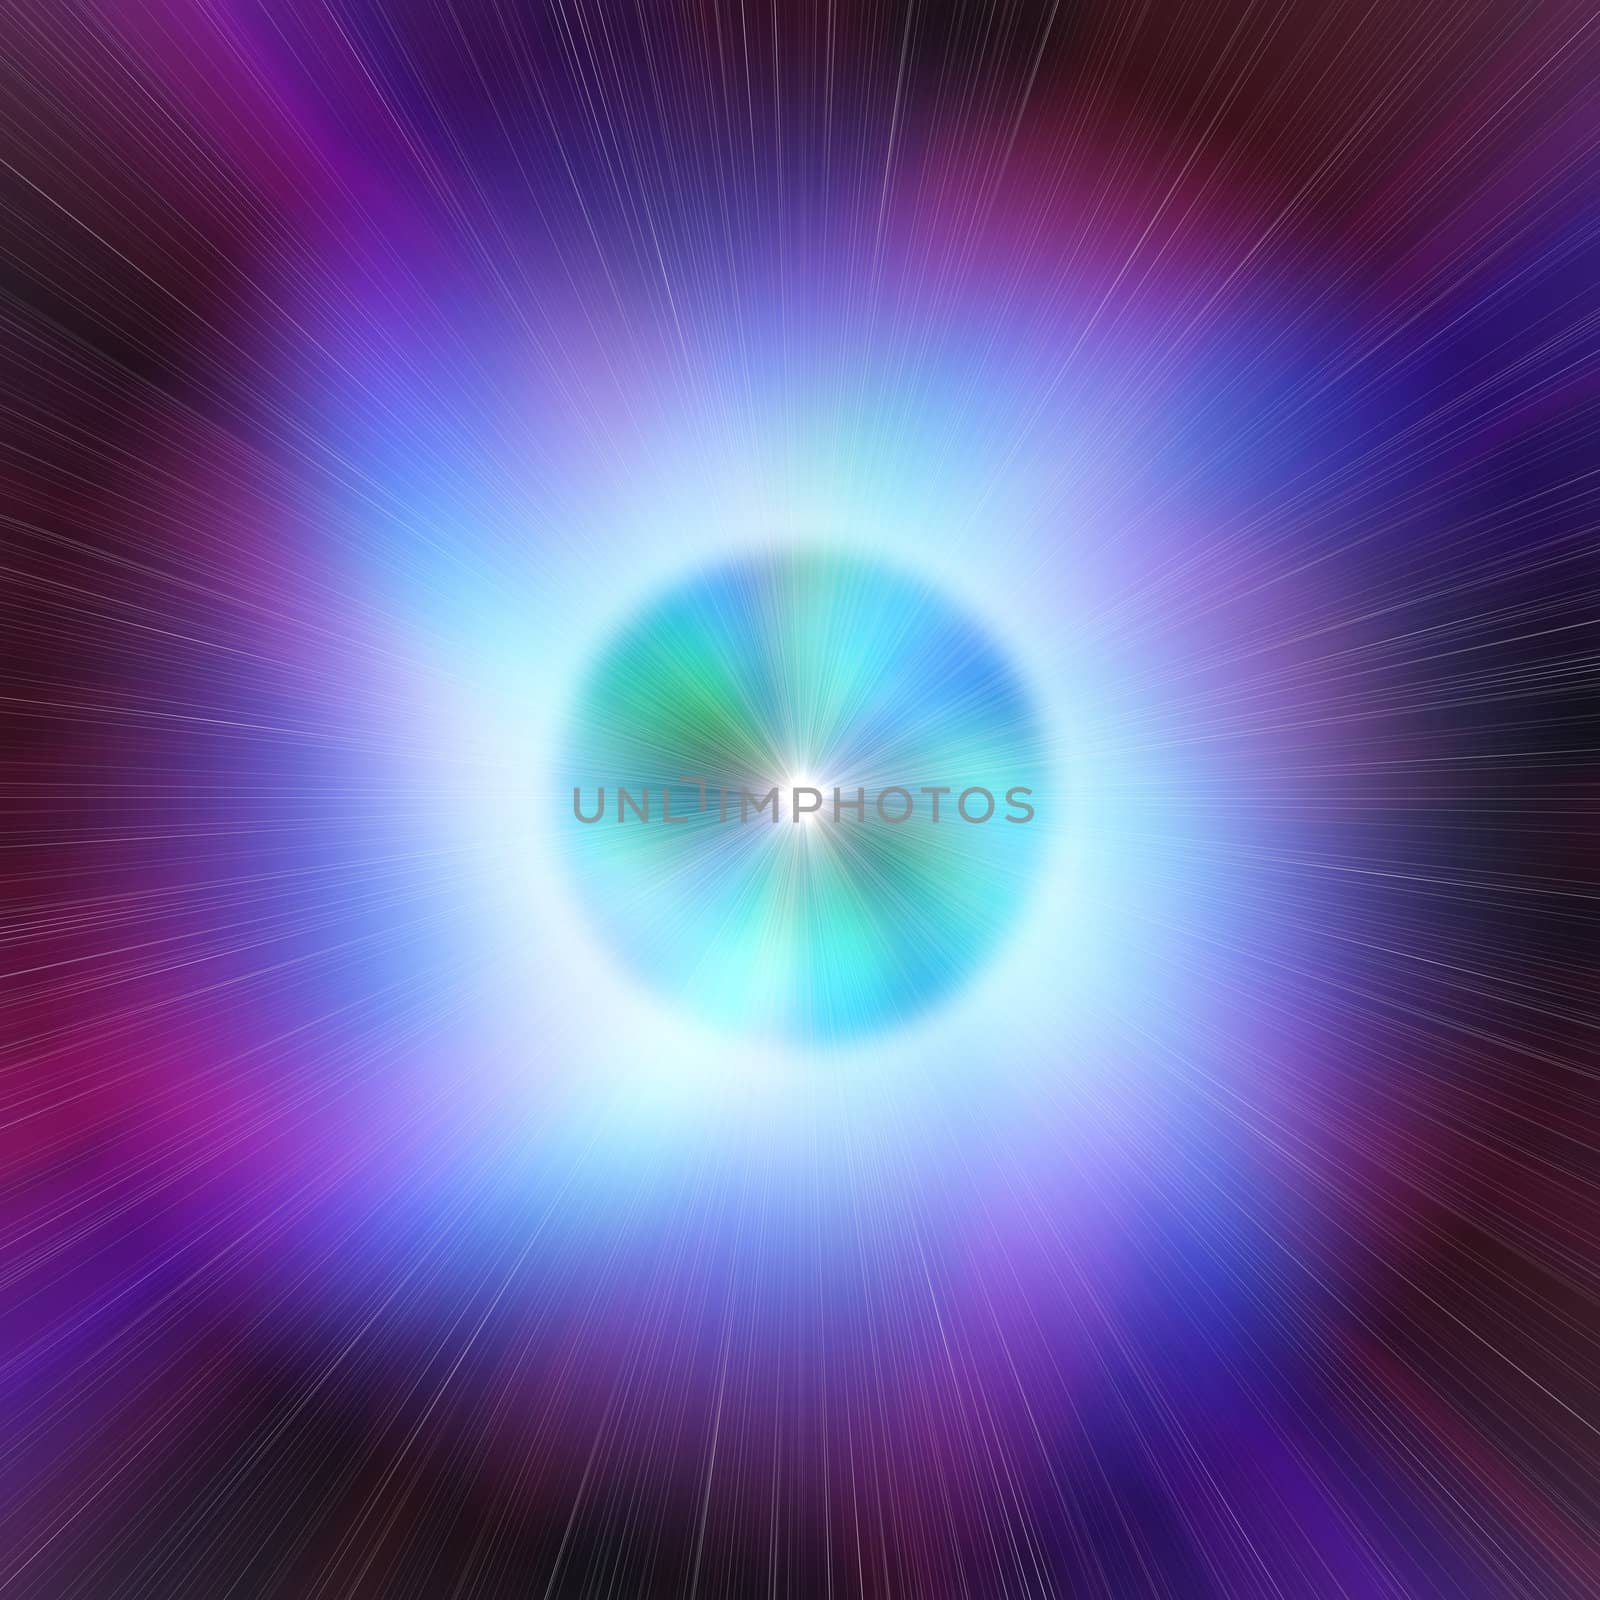 An illustration of a bright light speed background